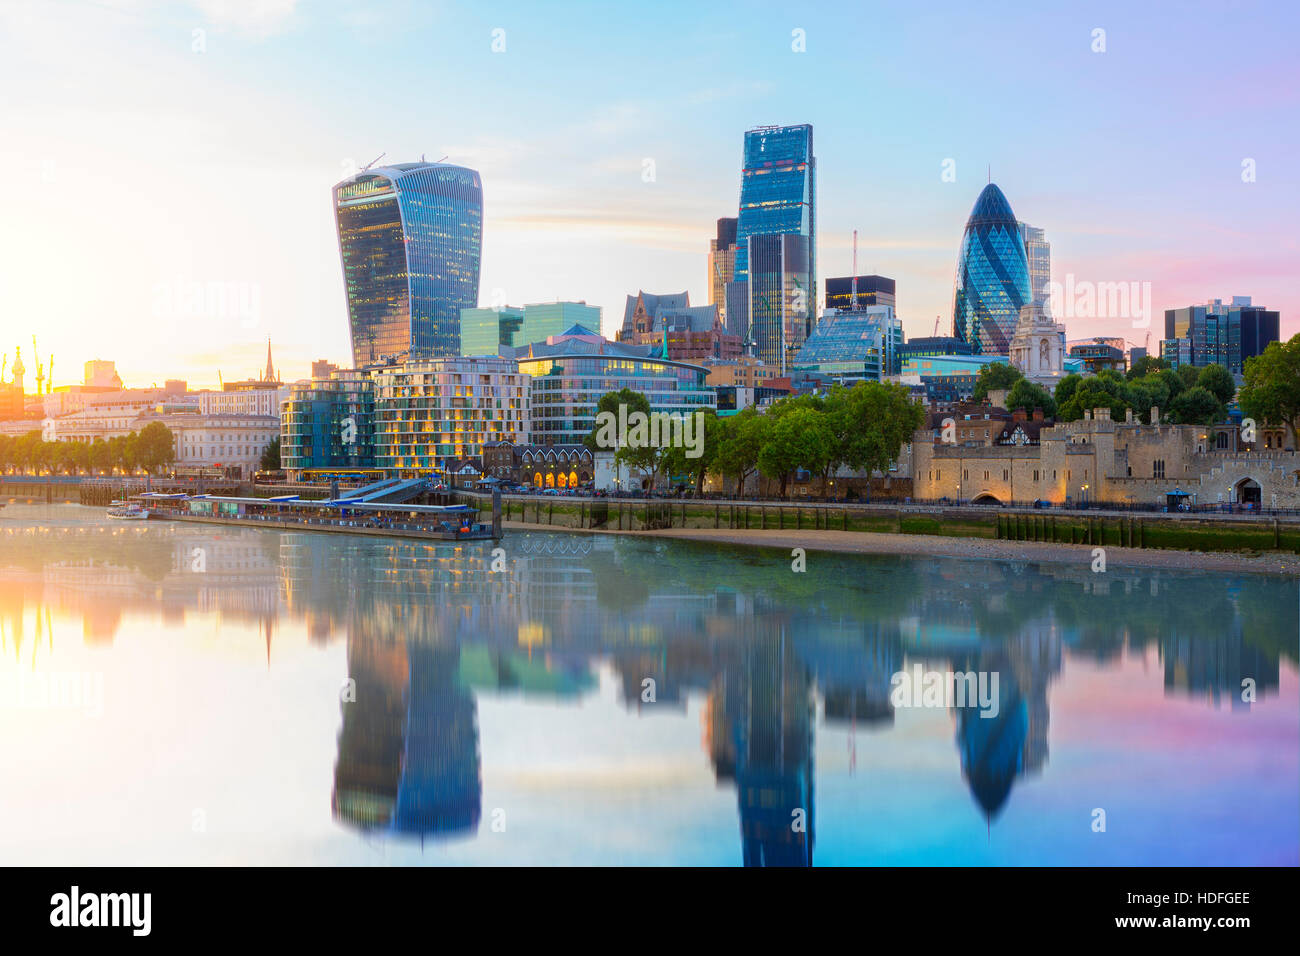 City of London, reflection of building on Thames river Stock Photo